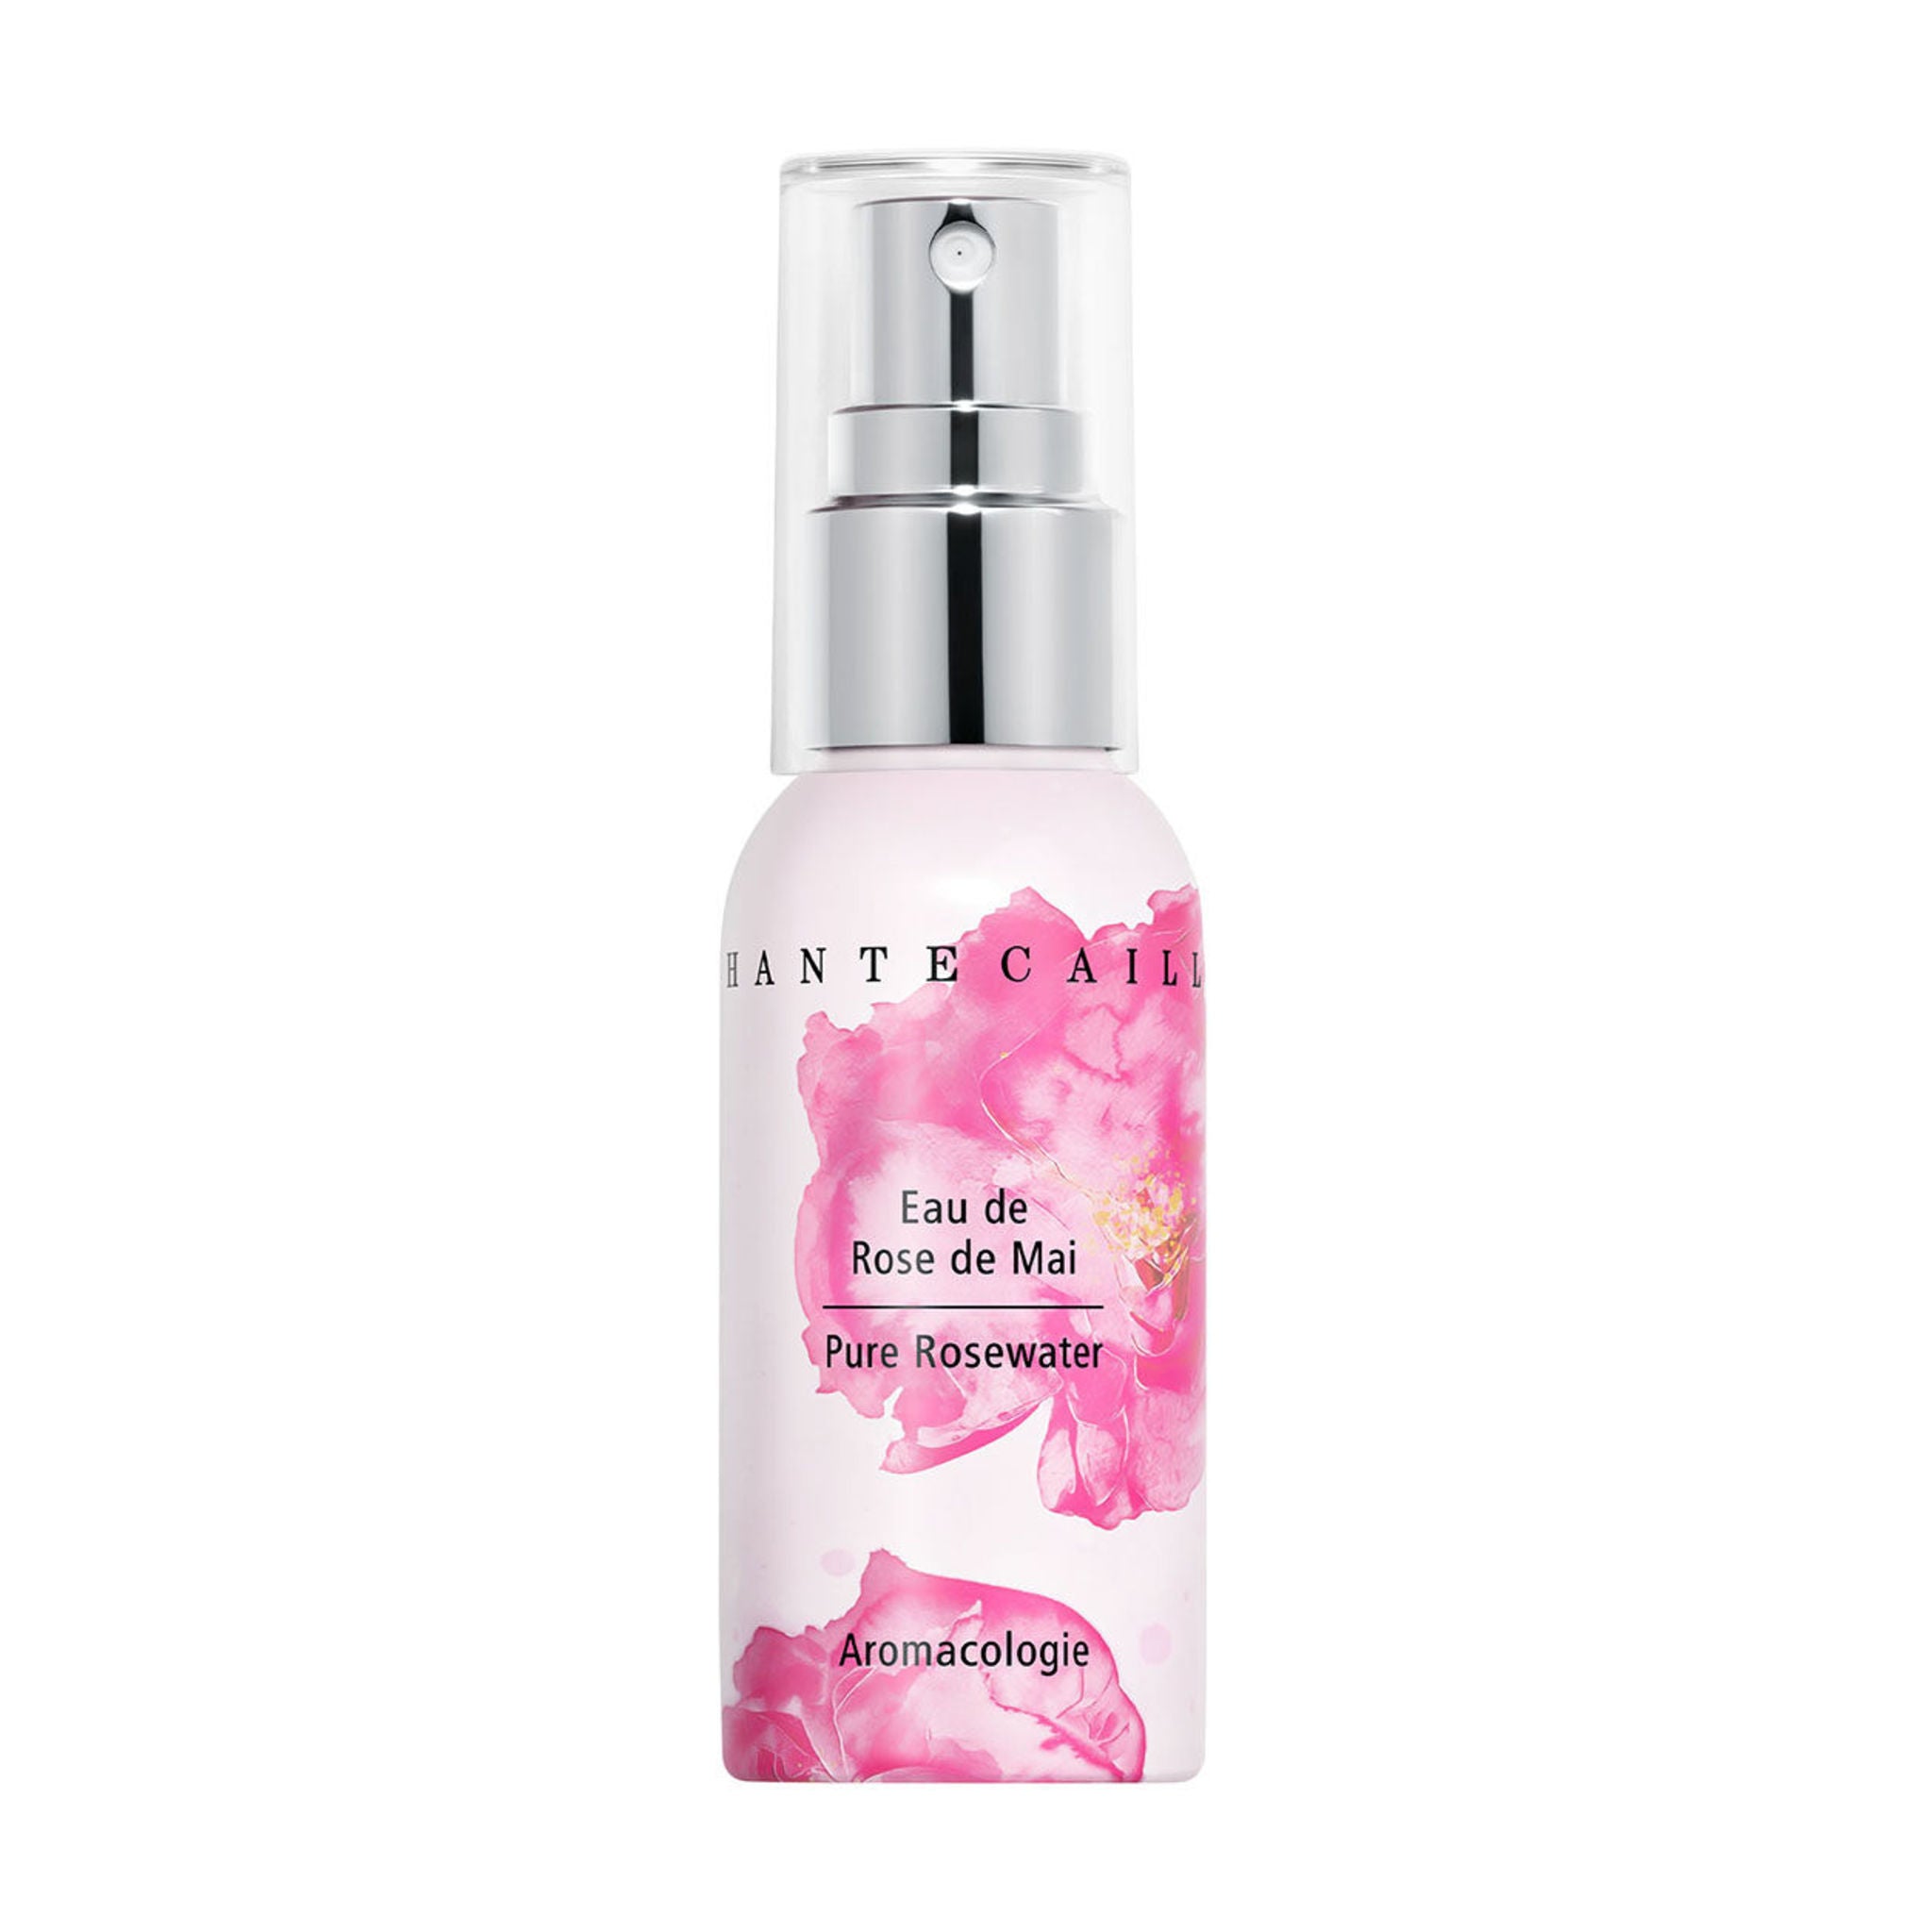 Chantecaille Pure Rosewater (Limited Edition) Size variant: 1.5 oz main image.